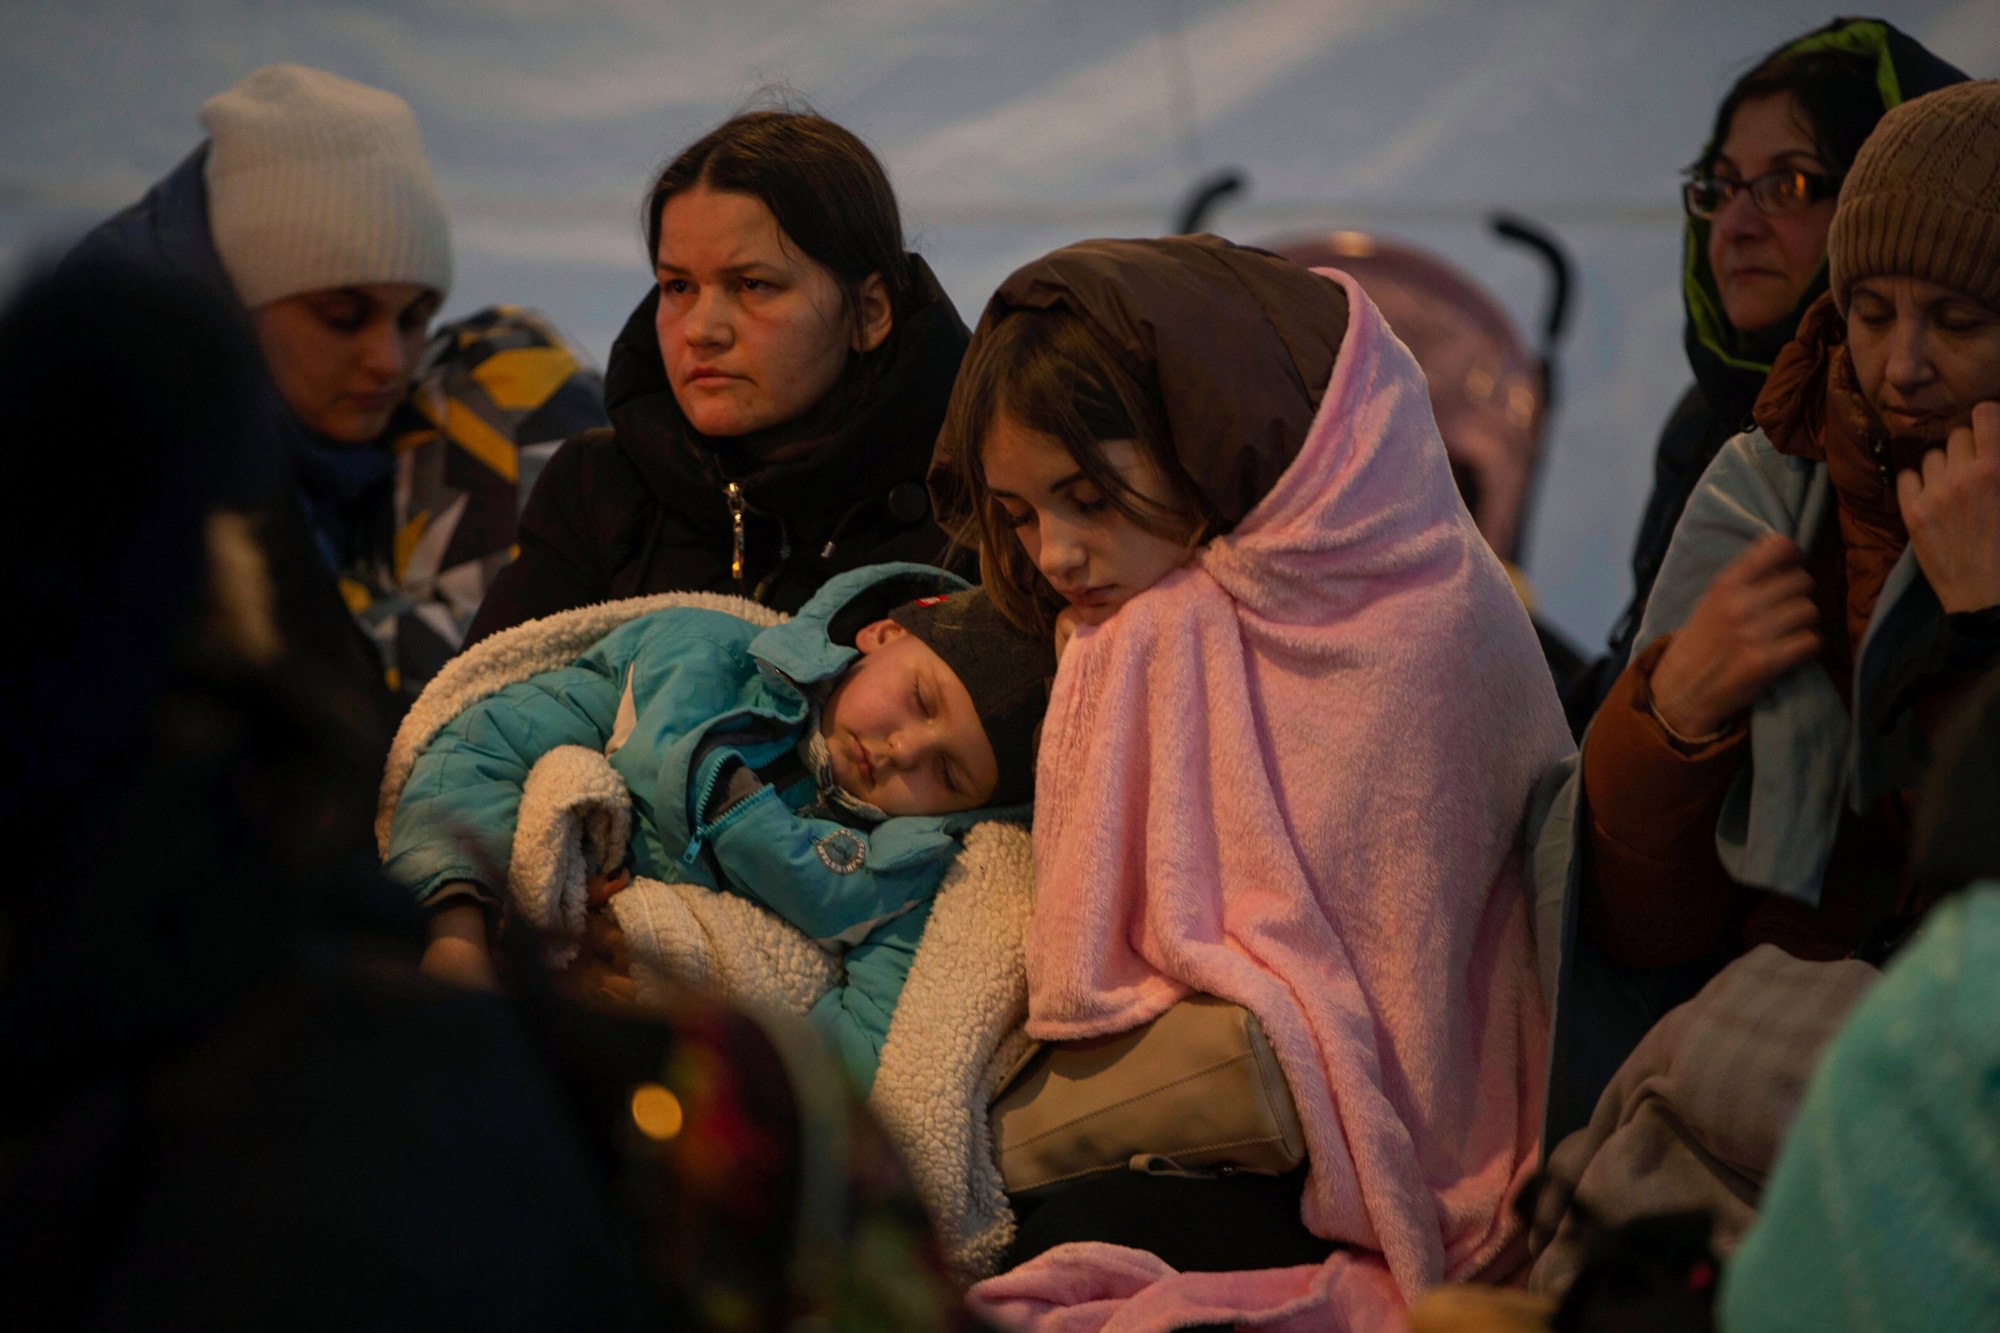 EXPLAINER: What is the US doing to help Ukraine refugees?